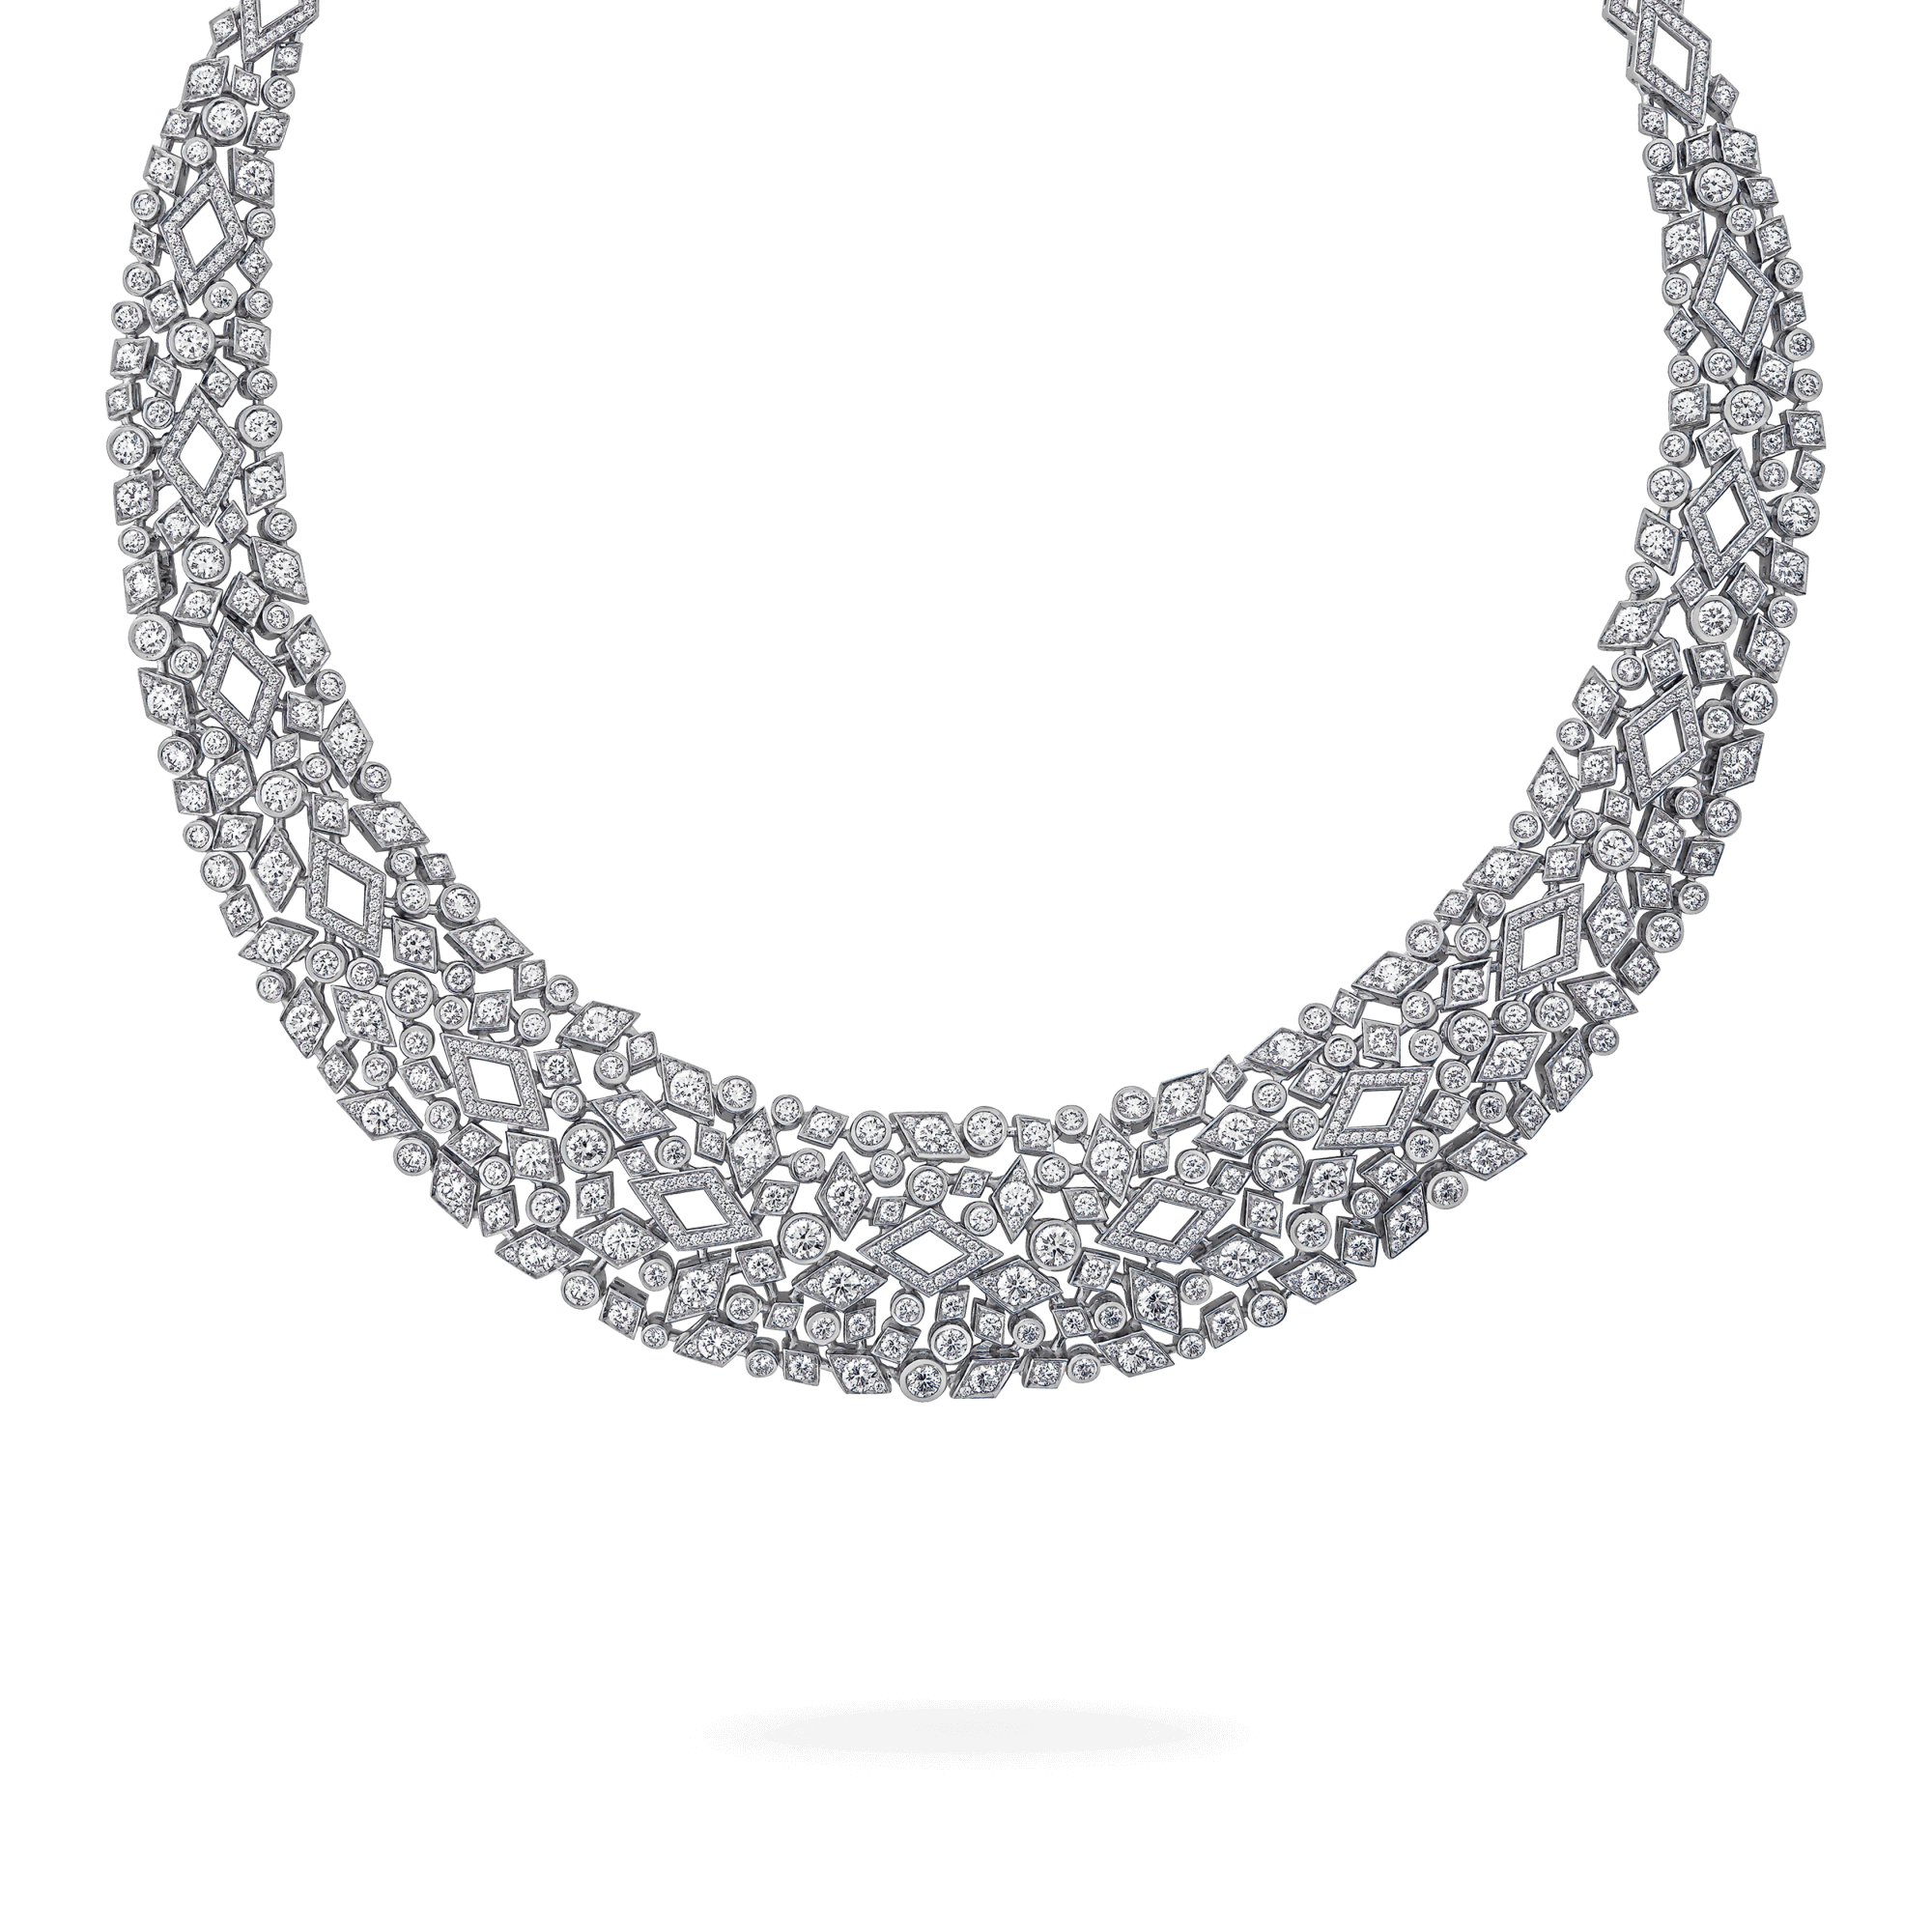 Garrard Albemarle High Jewellery Diamond Collar Necklace in 18ct White Gold.png